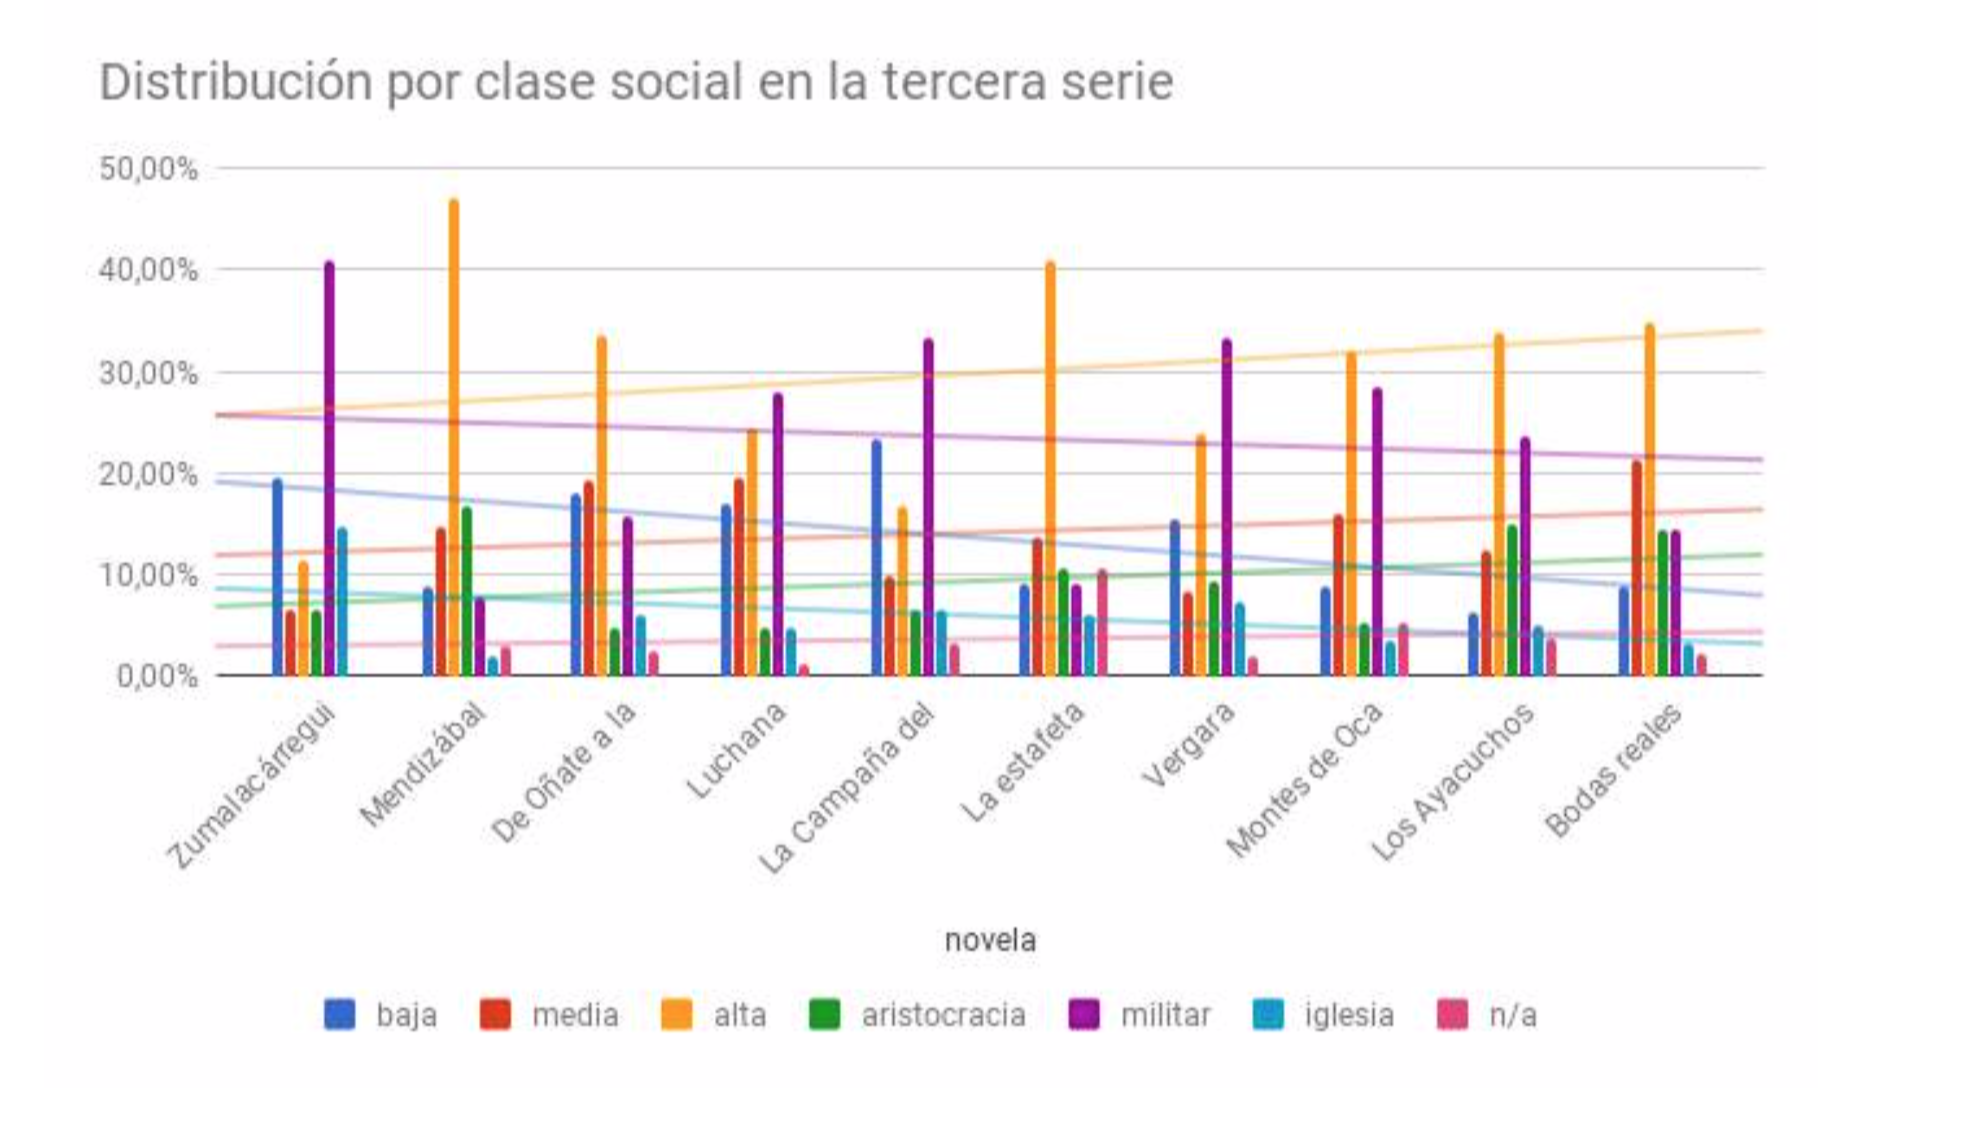 Distribution of characters by social class in the third series